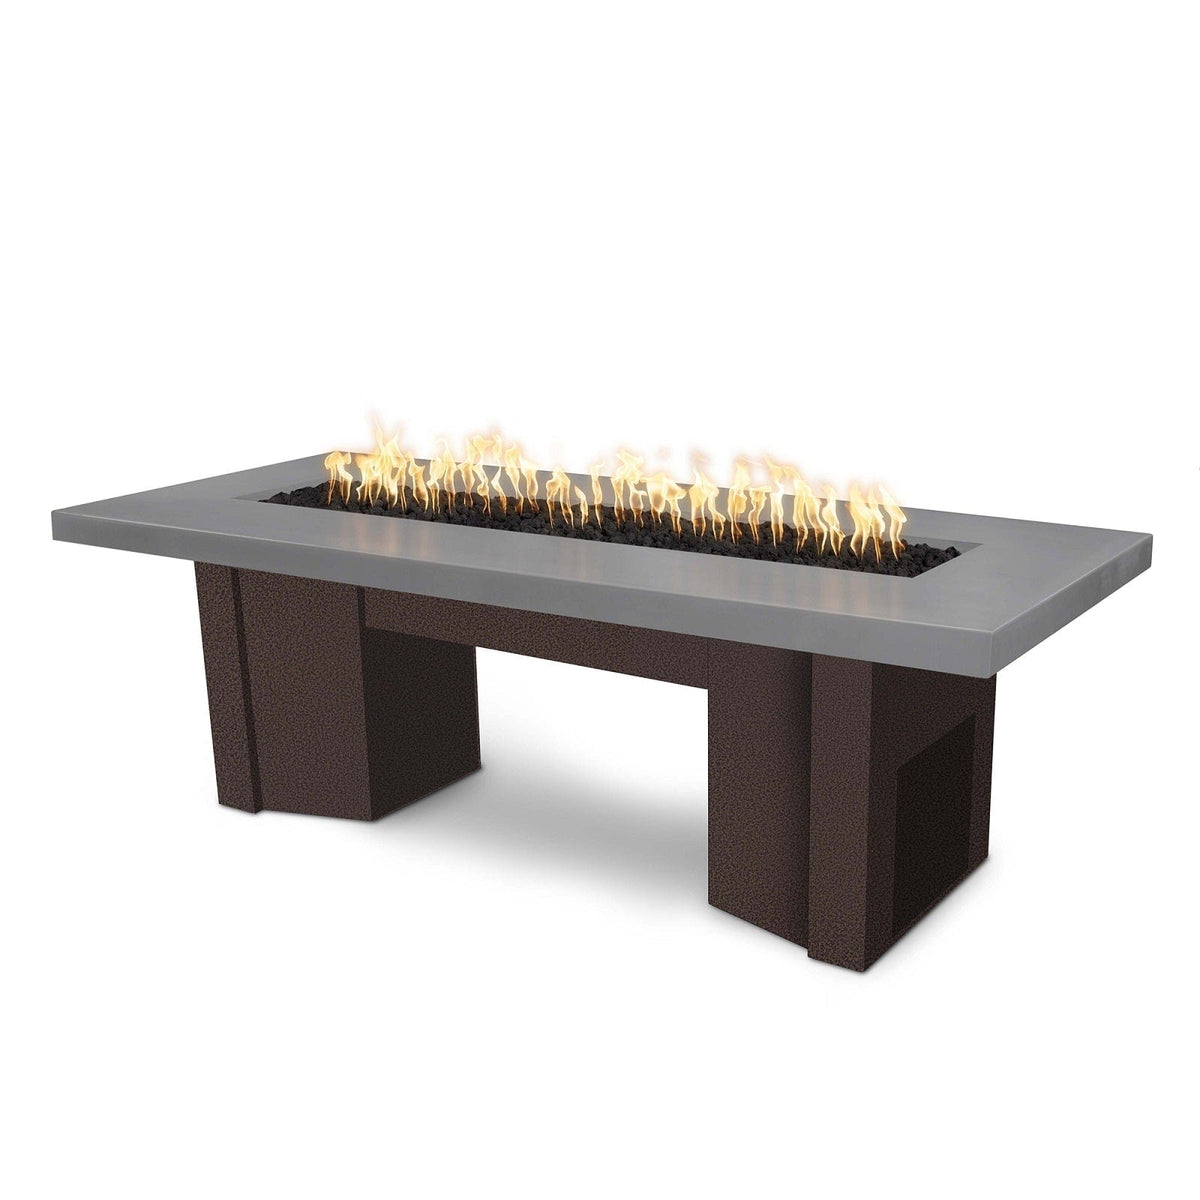 The Outdoor Plus Fire Features Natural Gray (-NGY) / Copper Vein Powder Coated Steel (-CPV) The Outdoor Plus 78&quot; Alameda Fire Table Smooth Concrete in Natural Gas - Flame Sense System with Push Button Spark Igniter / OPT-ALMGFRC78FSEN-NG